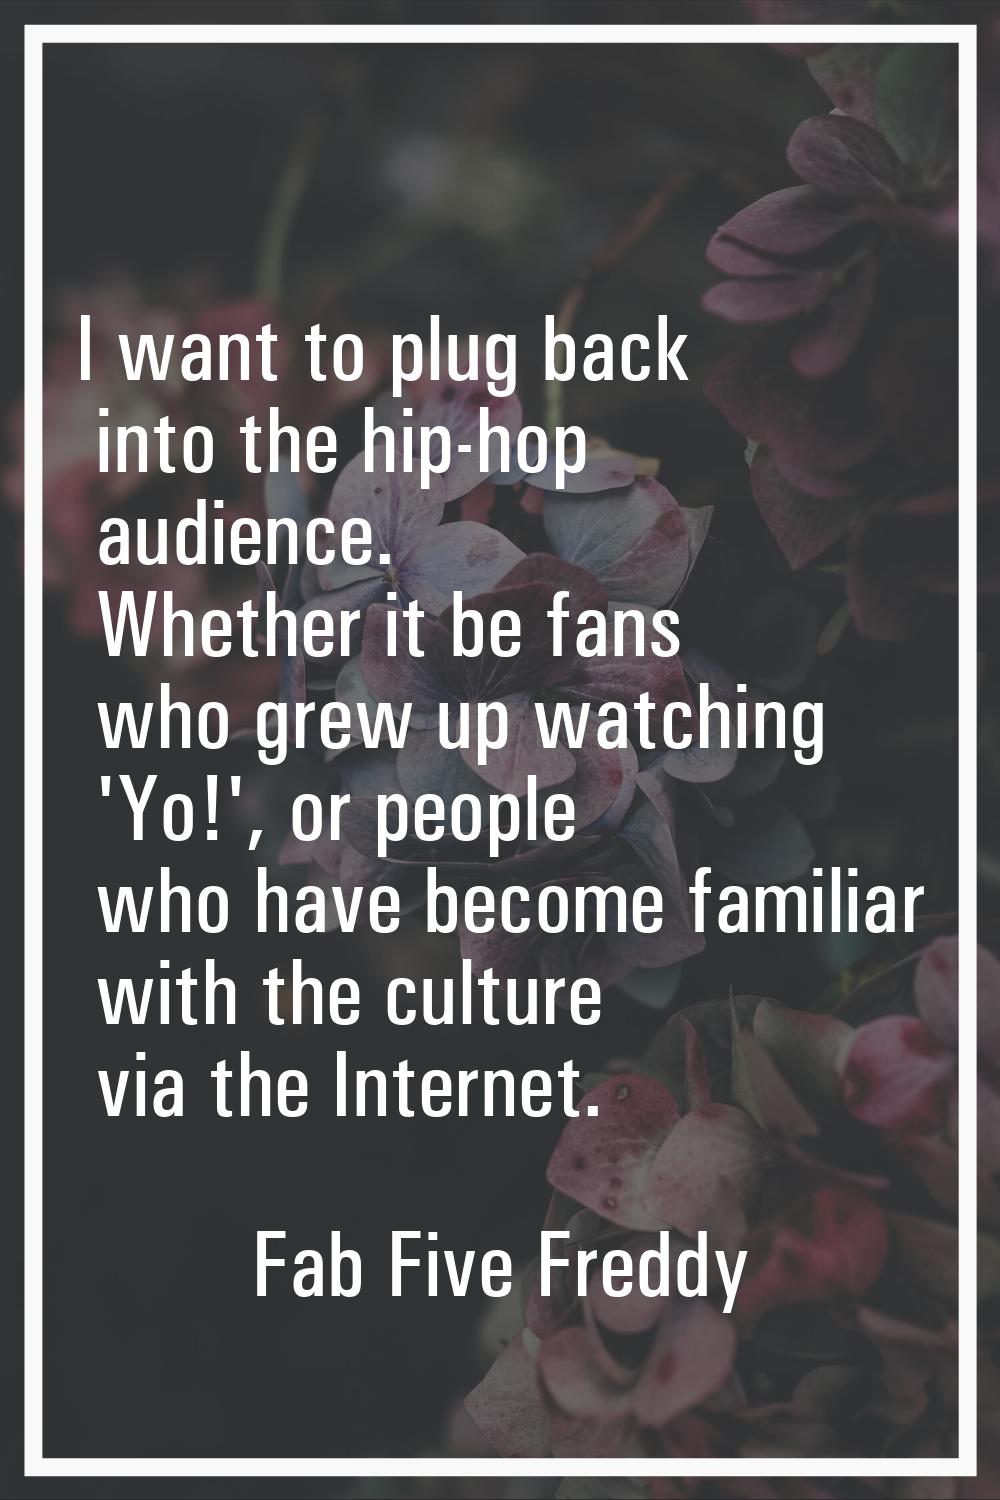 I want to plug back into the hip-hop audience. Whether it be fans who grew up watching 'Yo!', or pe